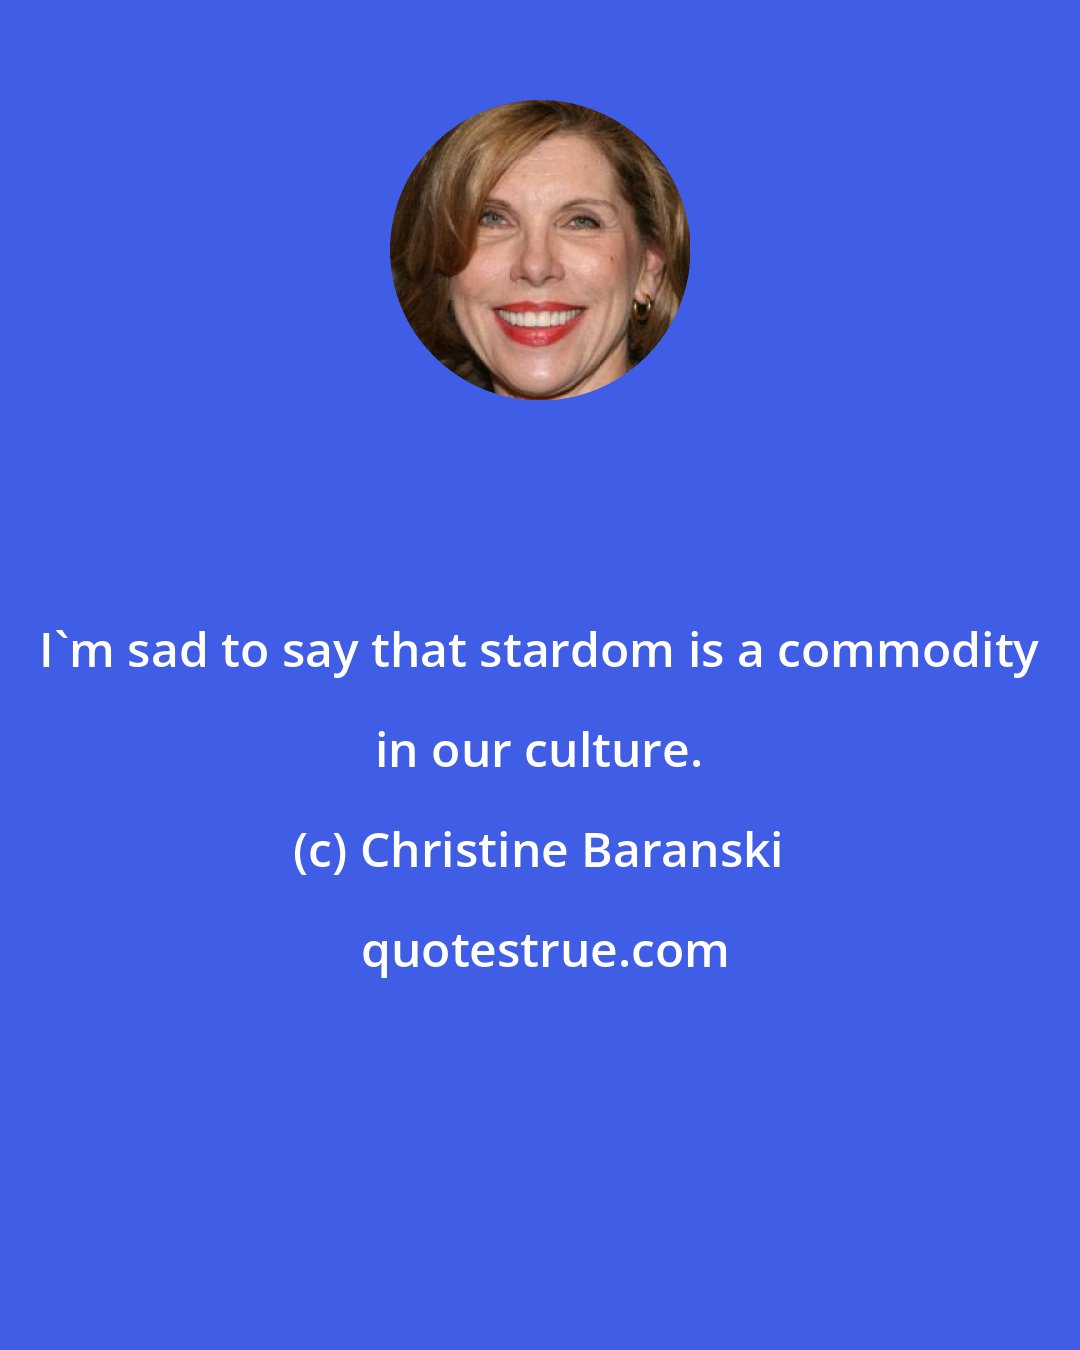 Christine Baranski: I'm sad to say that stardom is a commodity in our culture.